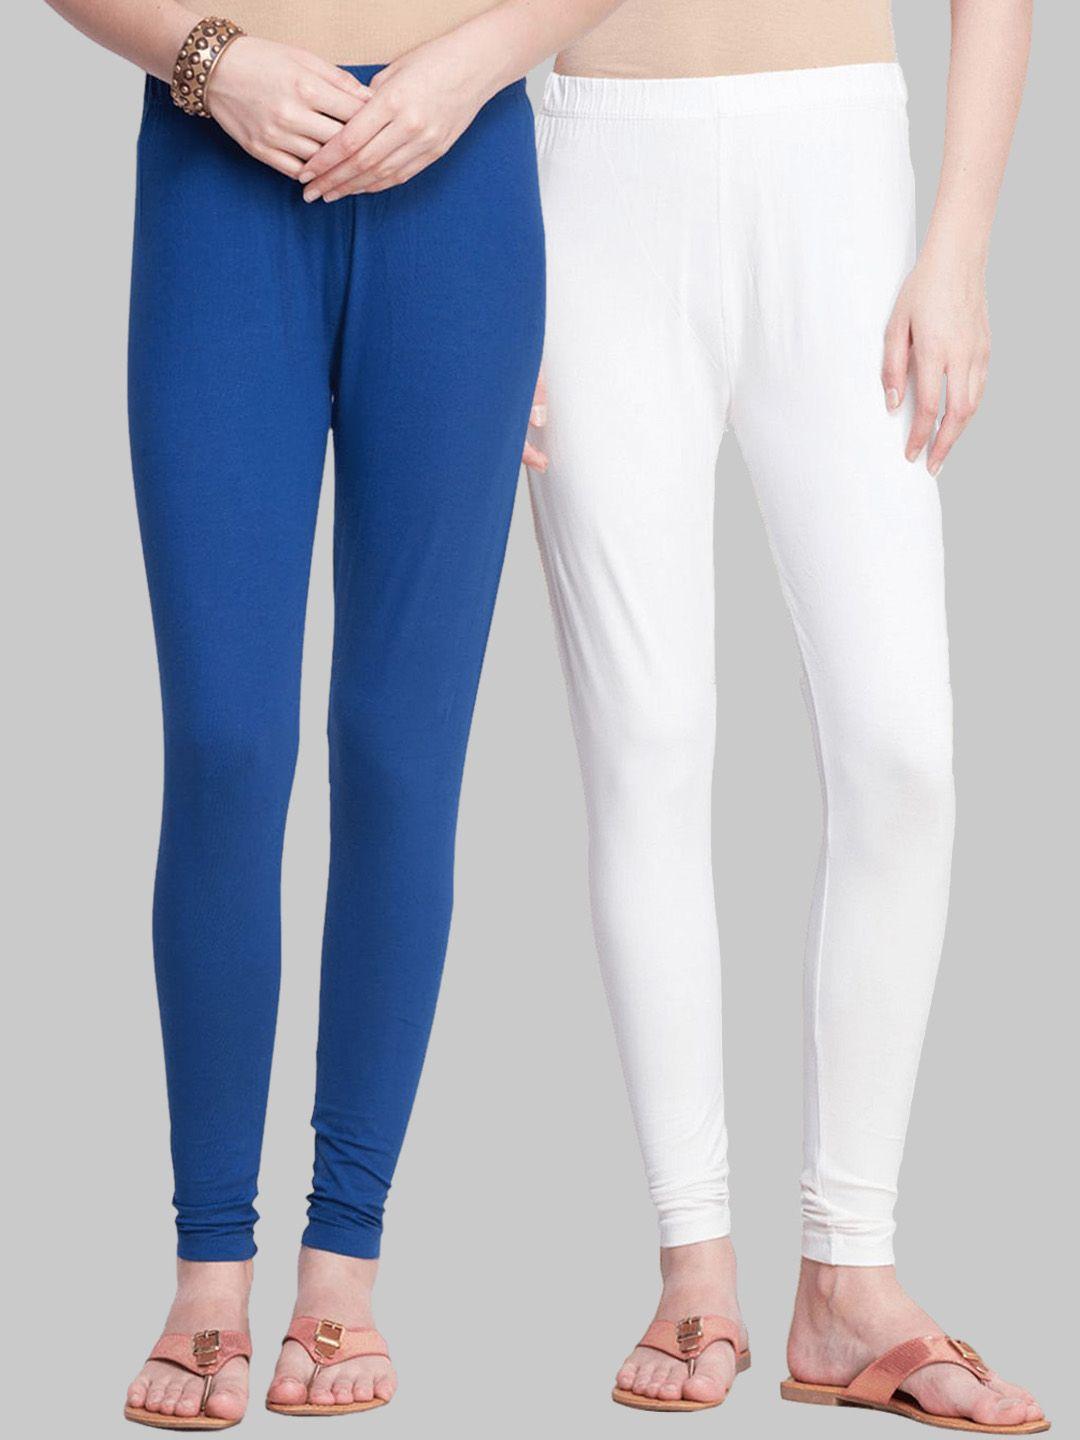 dollar missy women pack of 2 off-white & blue solid slim-fit cotton ankle-length leggings